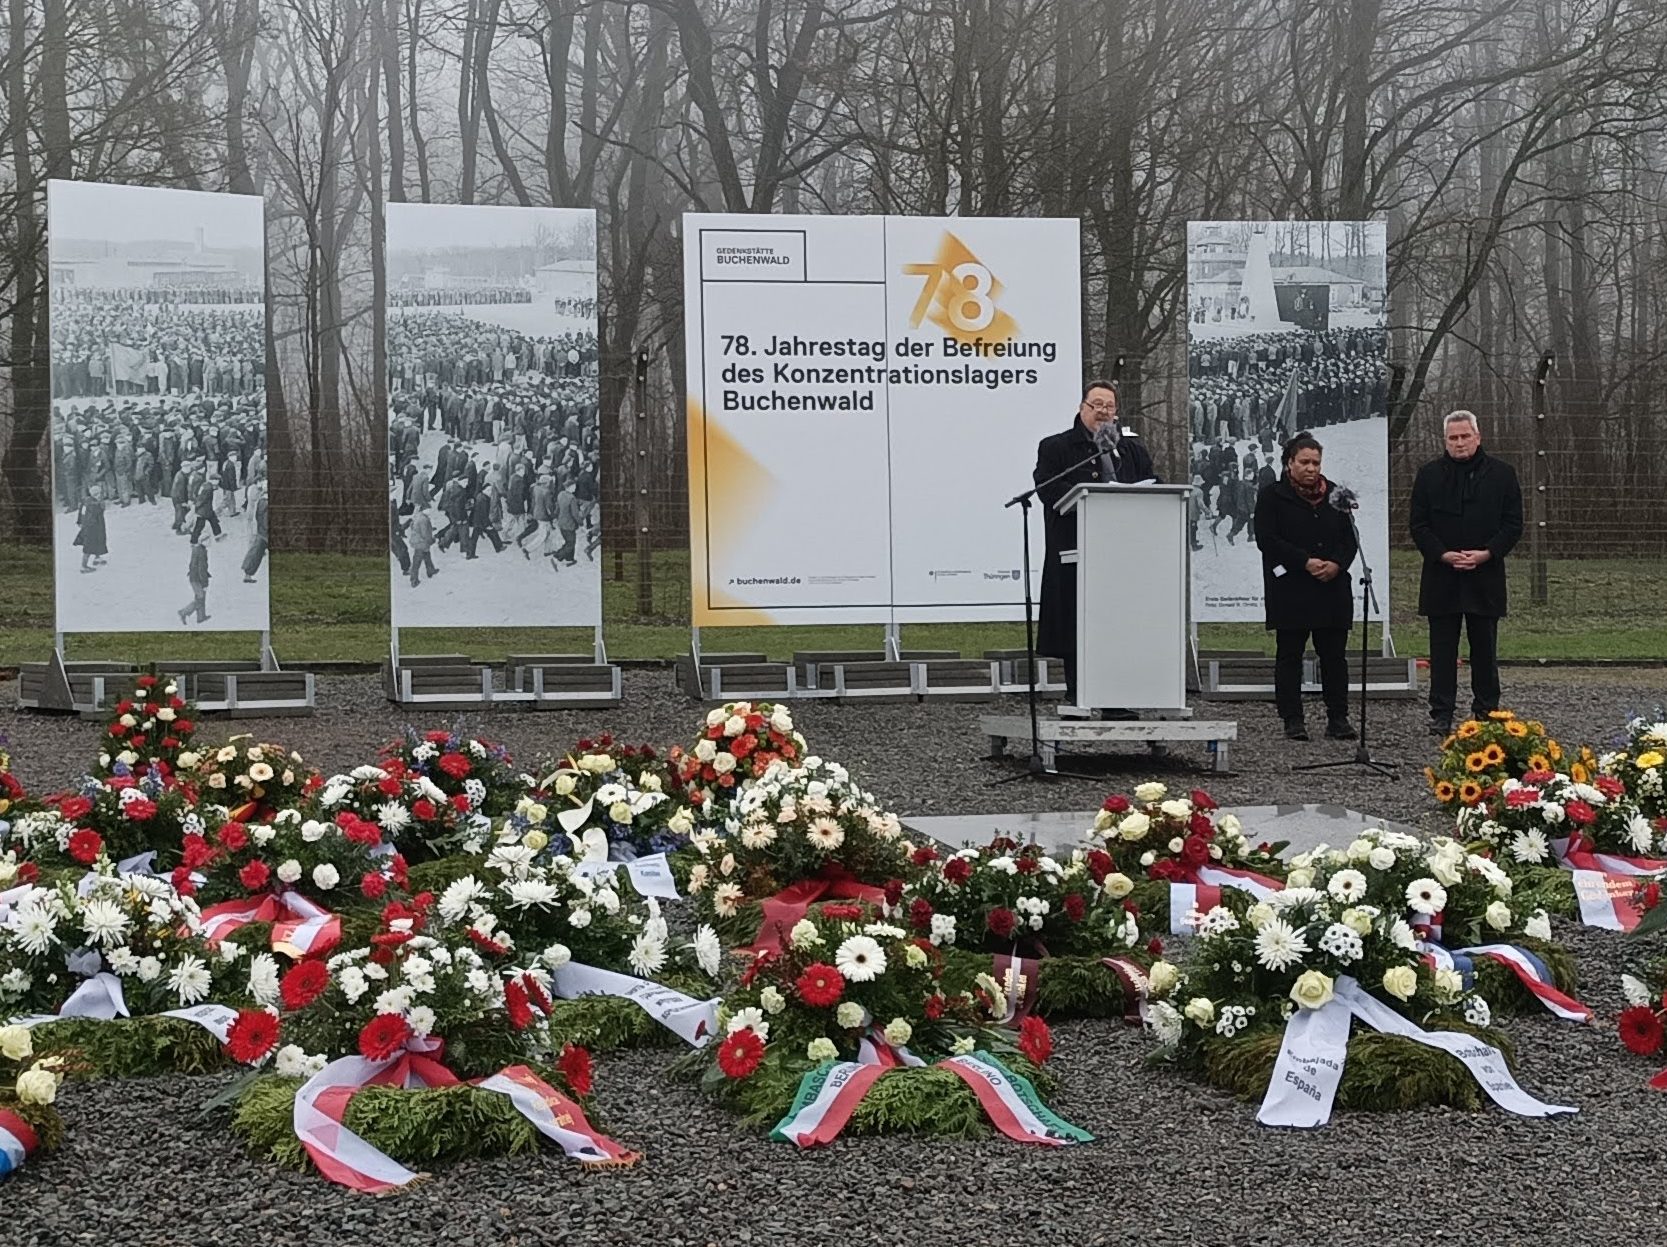 Jacques Delfeld stands at a lectern during his memorial speech. In front of him are many wreaths of flowers. Behind him are large-format posters with pictures of the liberation of Buchenwald concentration camp.